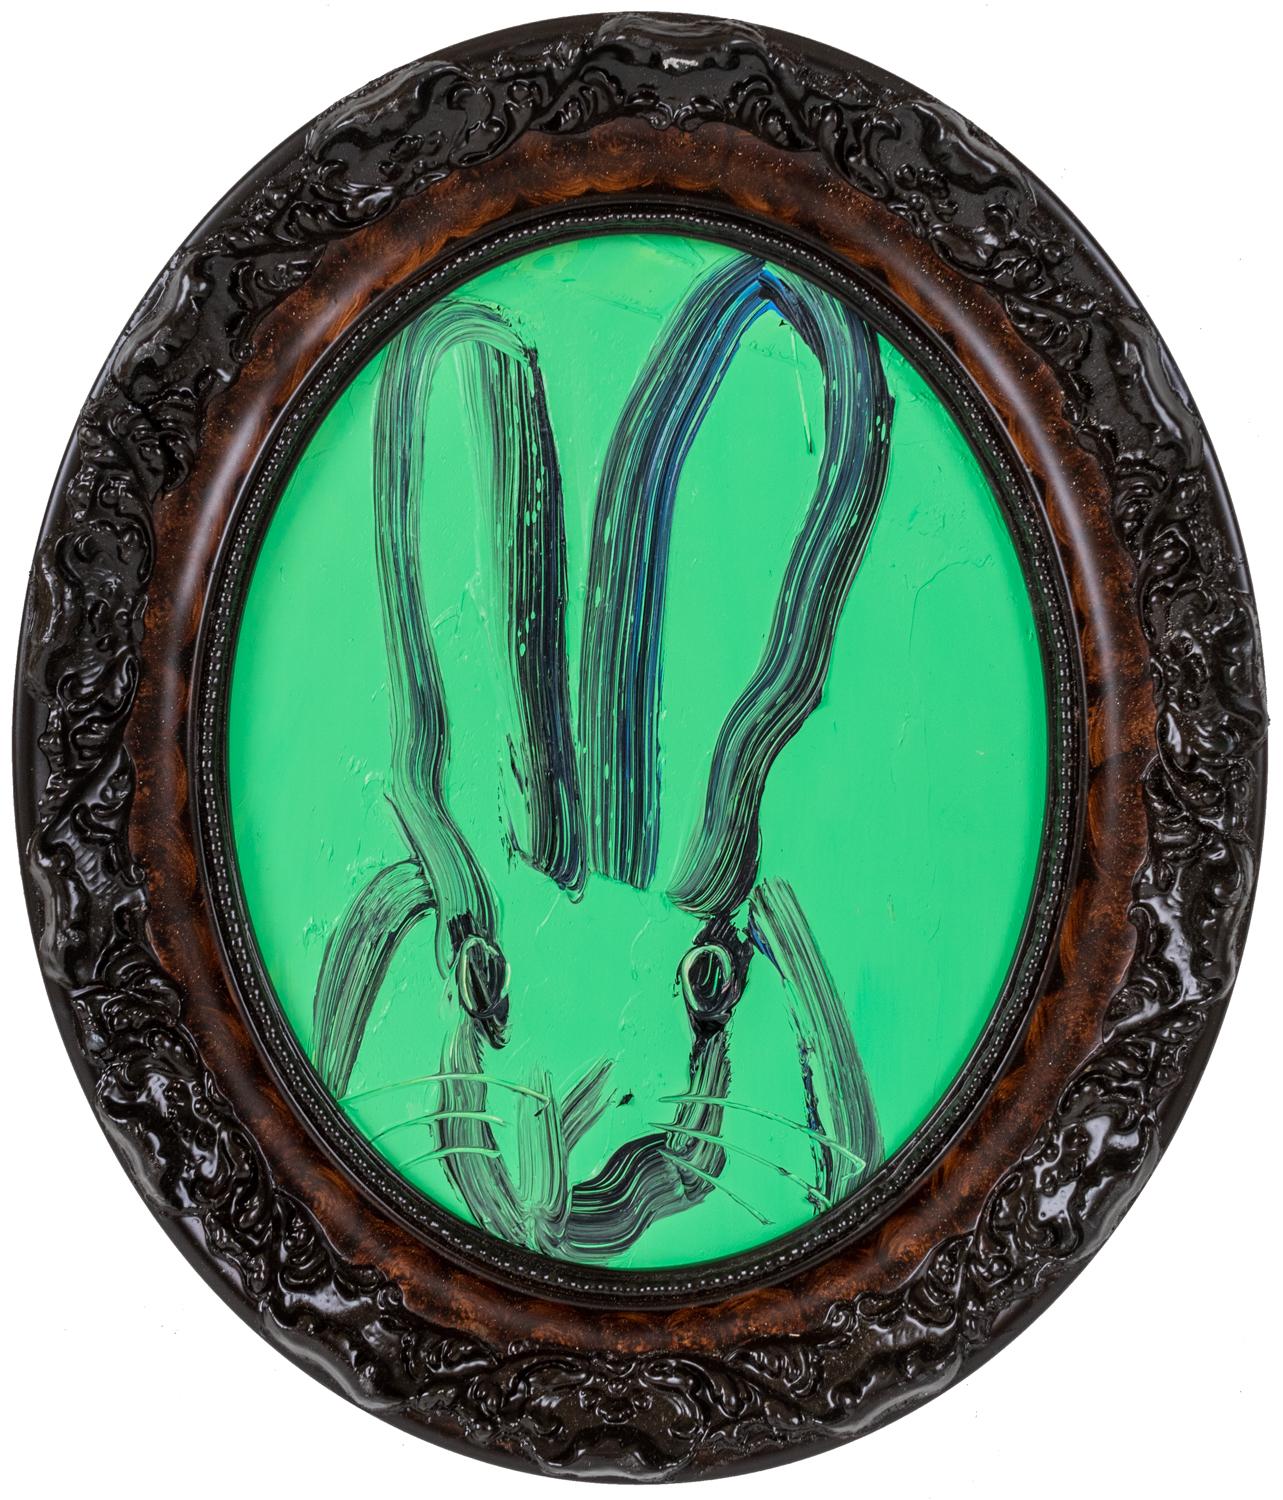 Hunt Slonem Animal Painting - Green "Bunny Painting" Original Oil Painting in Oval Vintage Frame